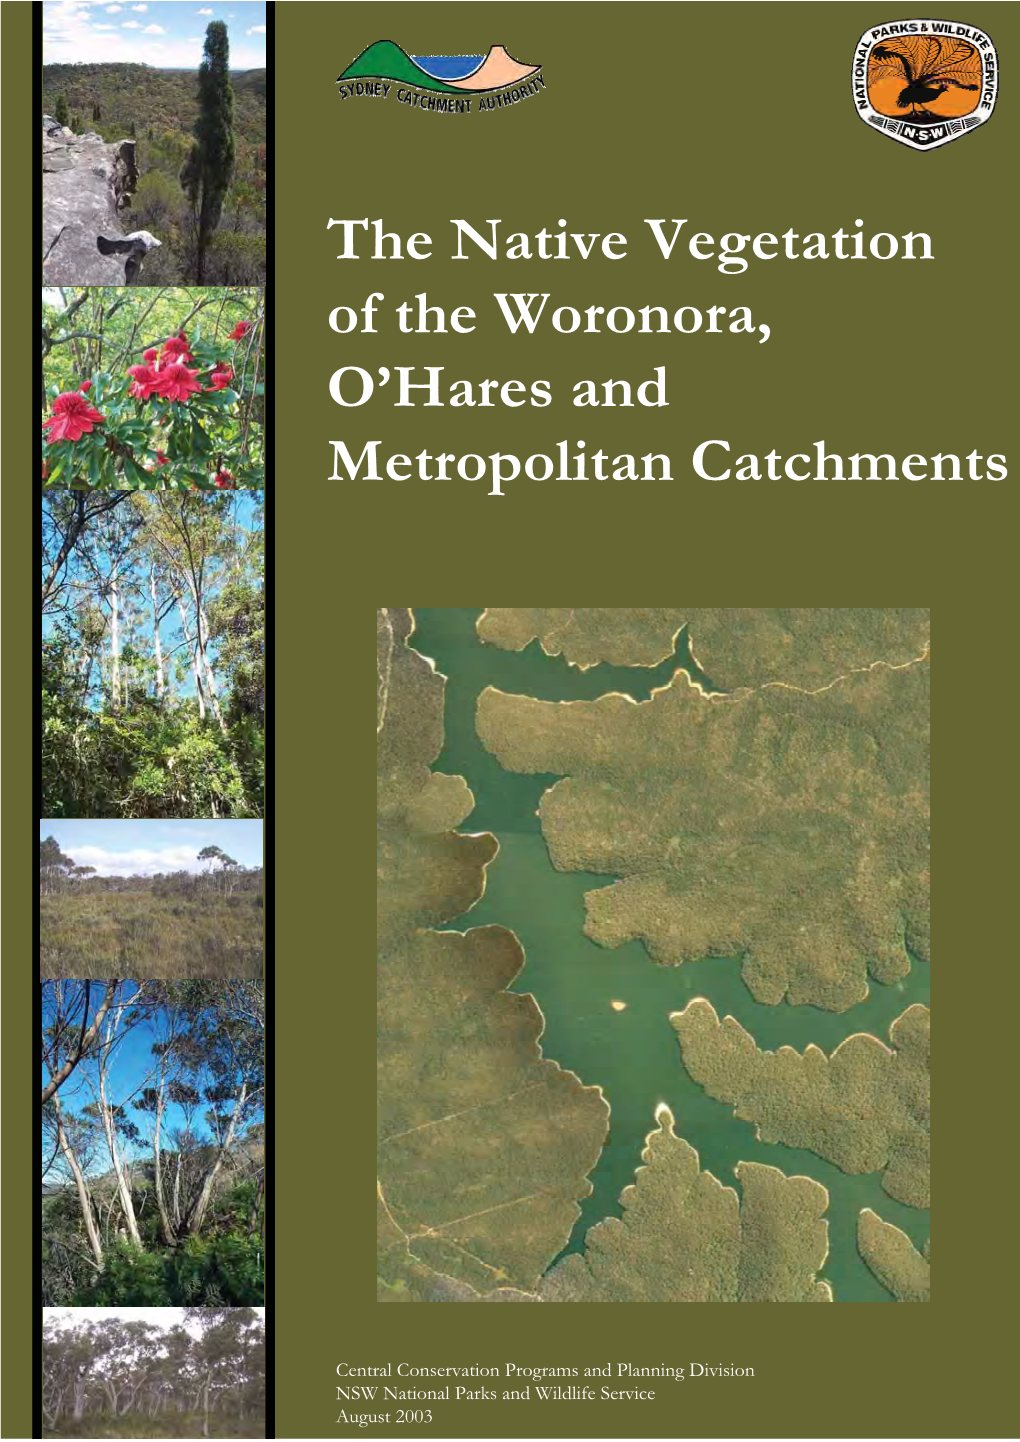 Native Vegetation of the Woronora, O'hares and Metroplitan Catchments